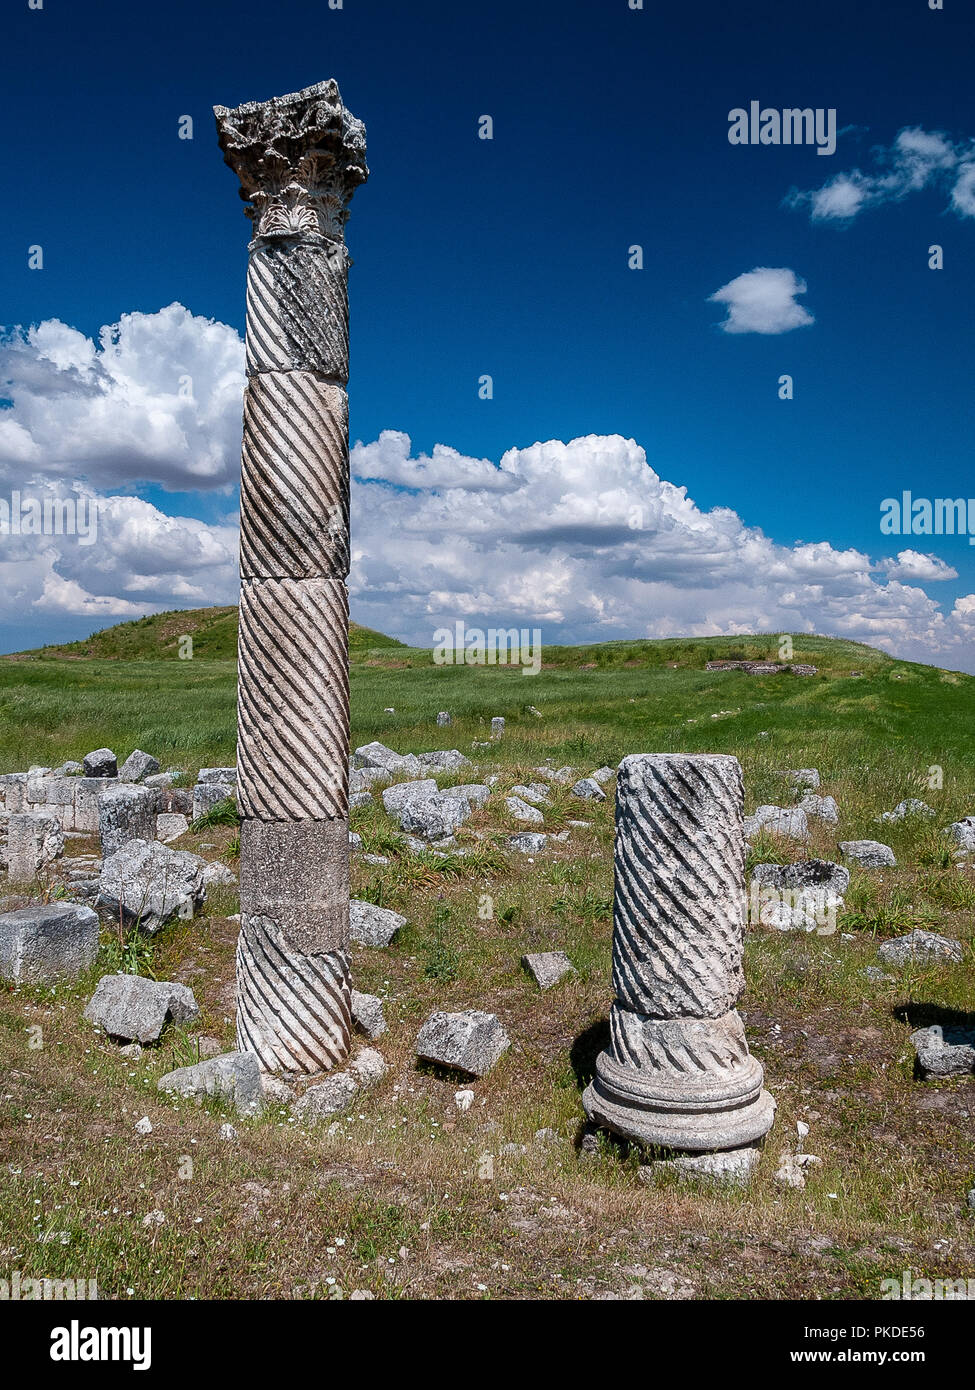 Apamea (also known as Afamia), the ancient Greek and Roman city. The site is located near Qalaat al-Madiq, about 60 km to the northwest of Hama, Syria Stock Photo